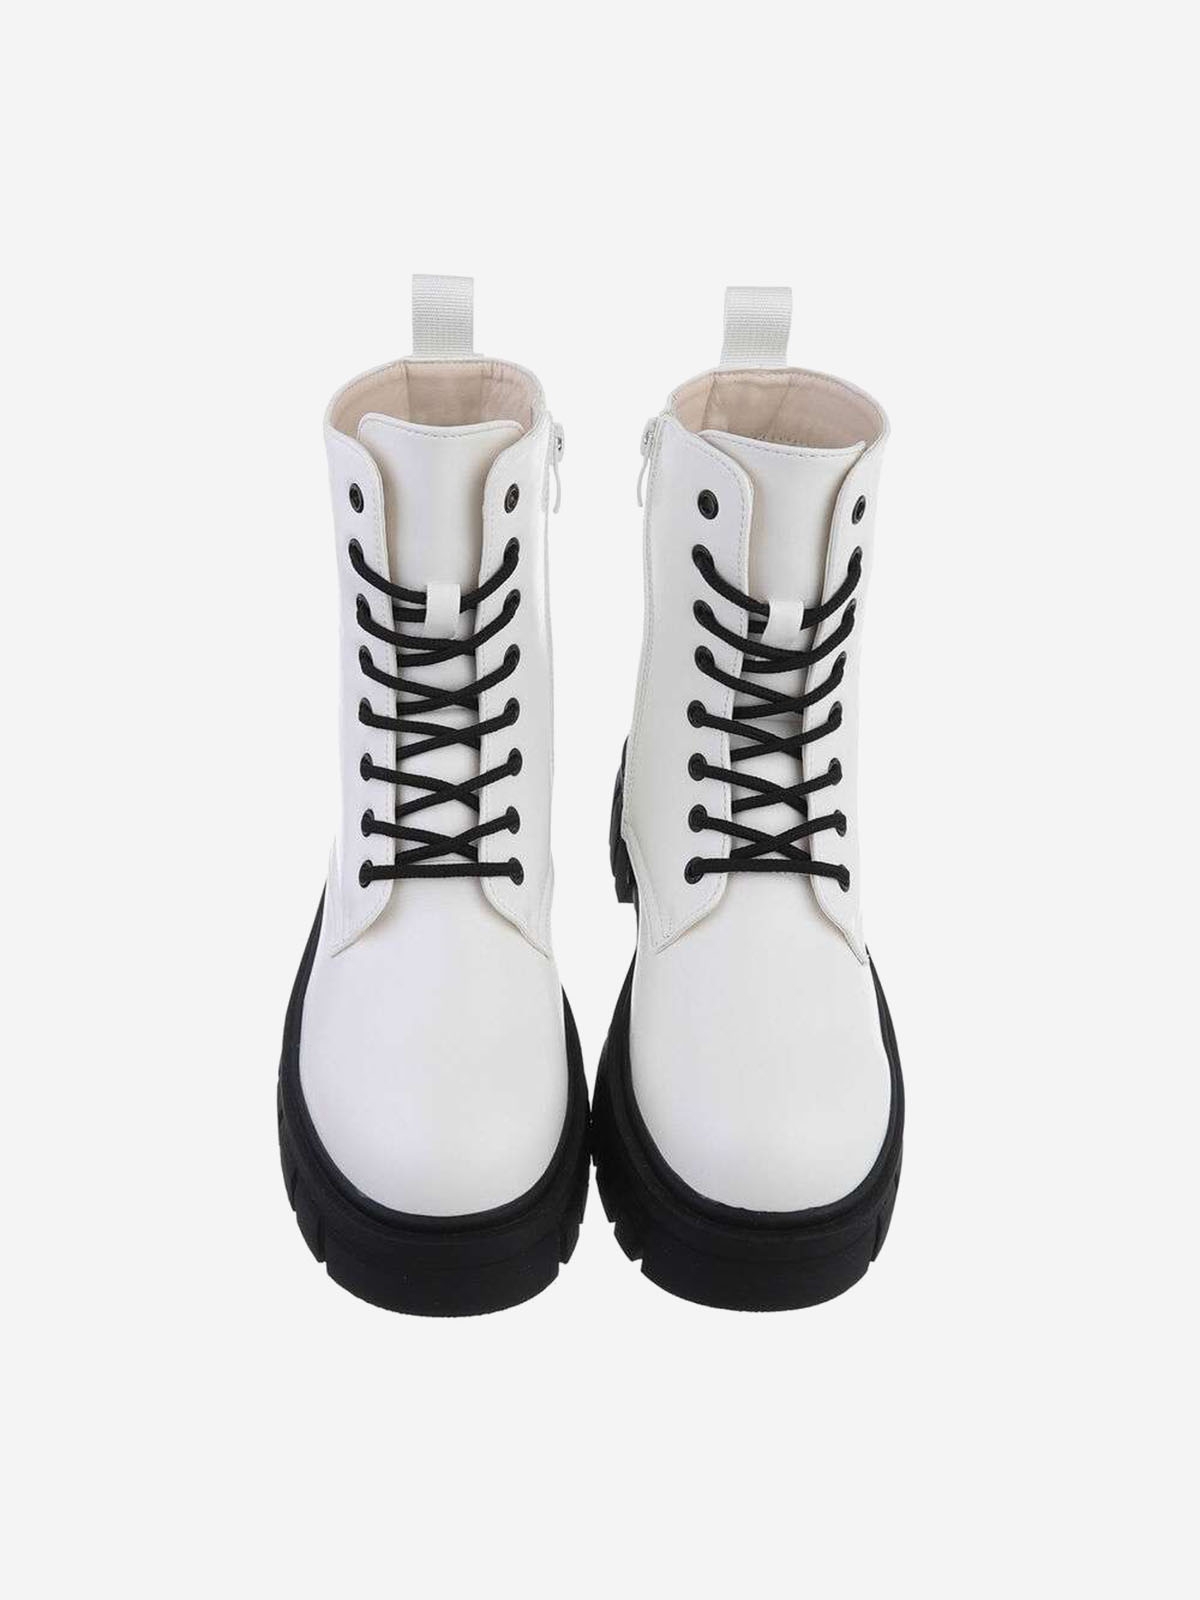 Lace-up women's ankle boots with platform in white